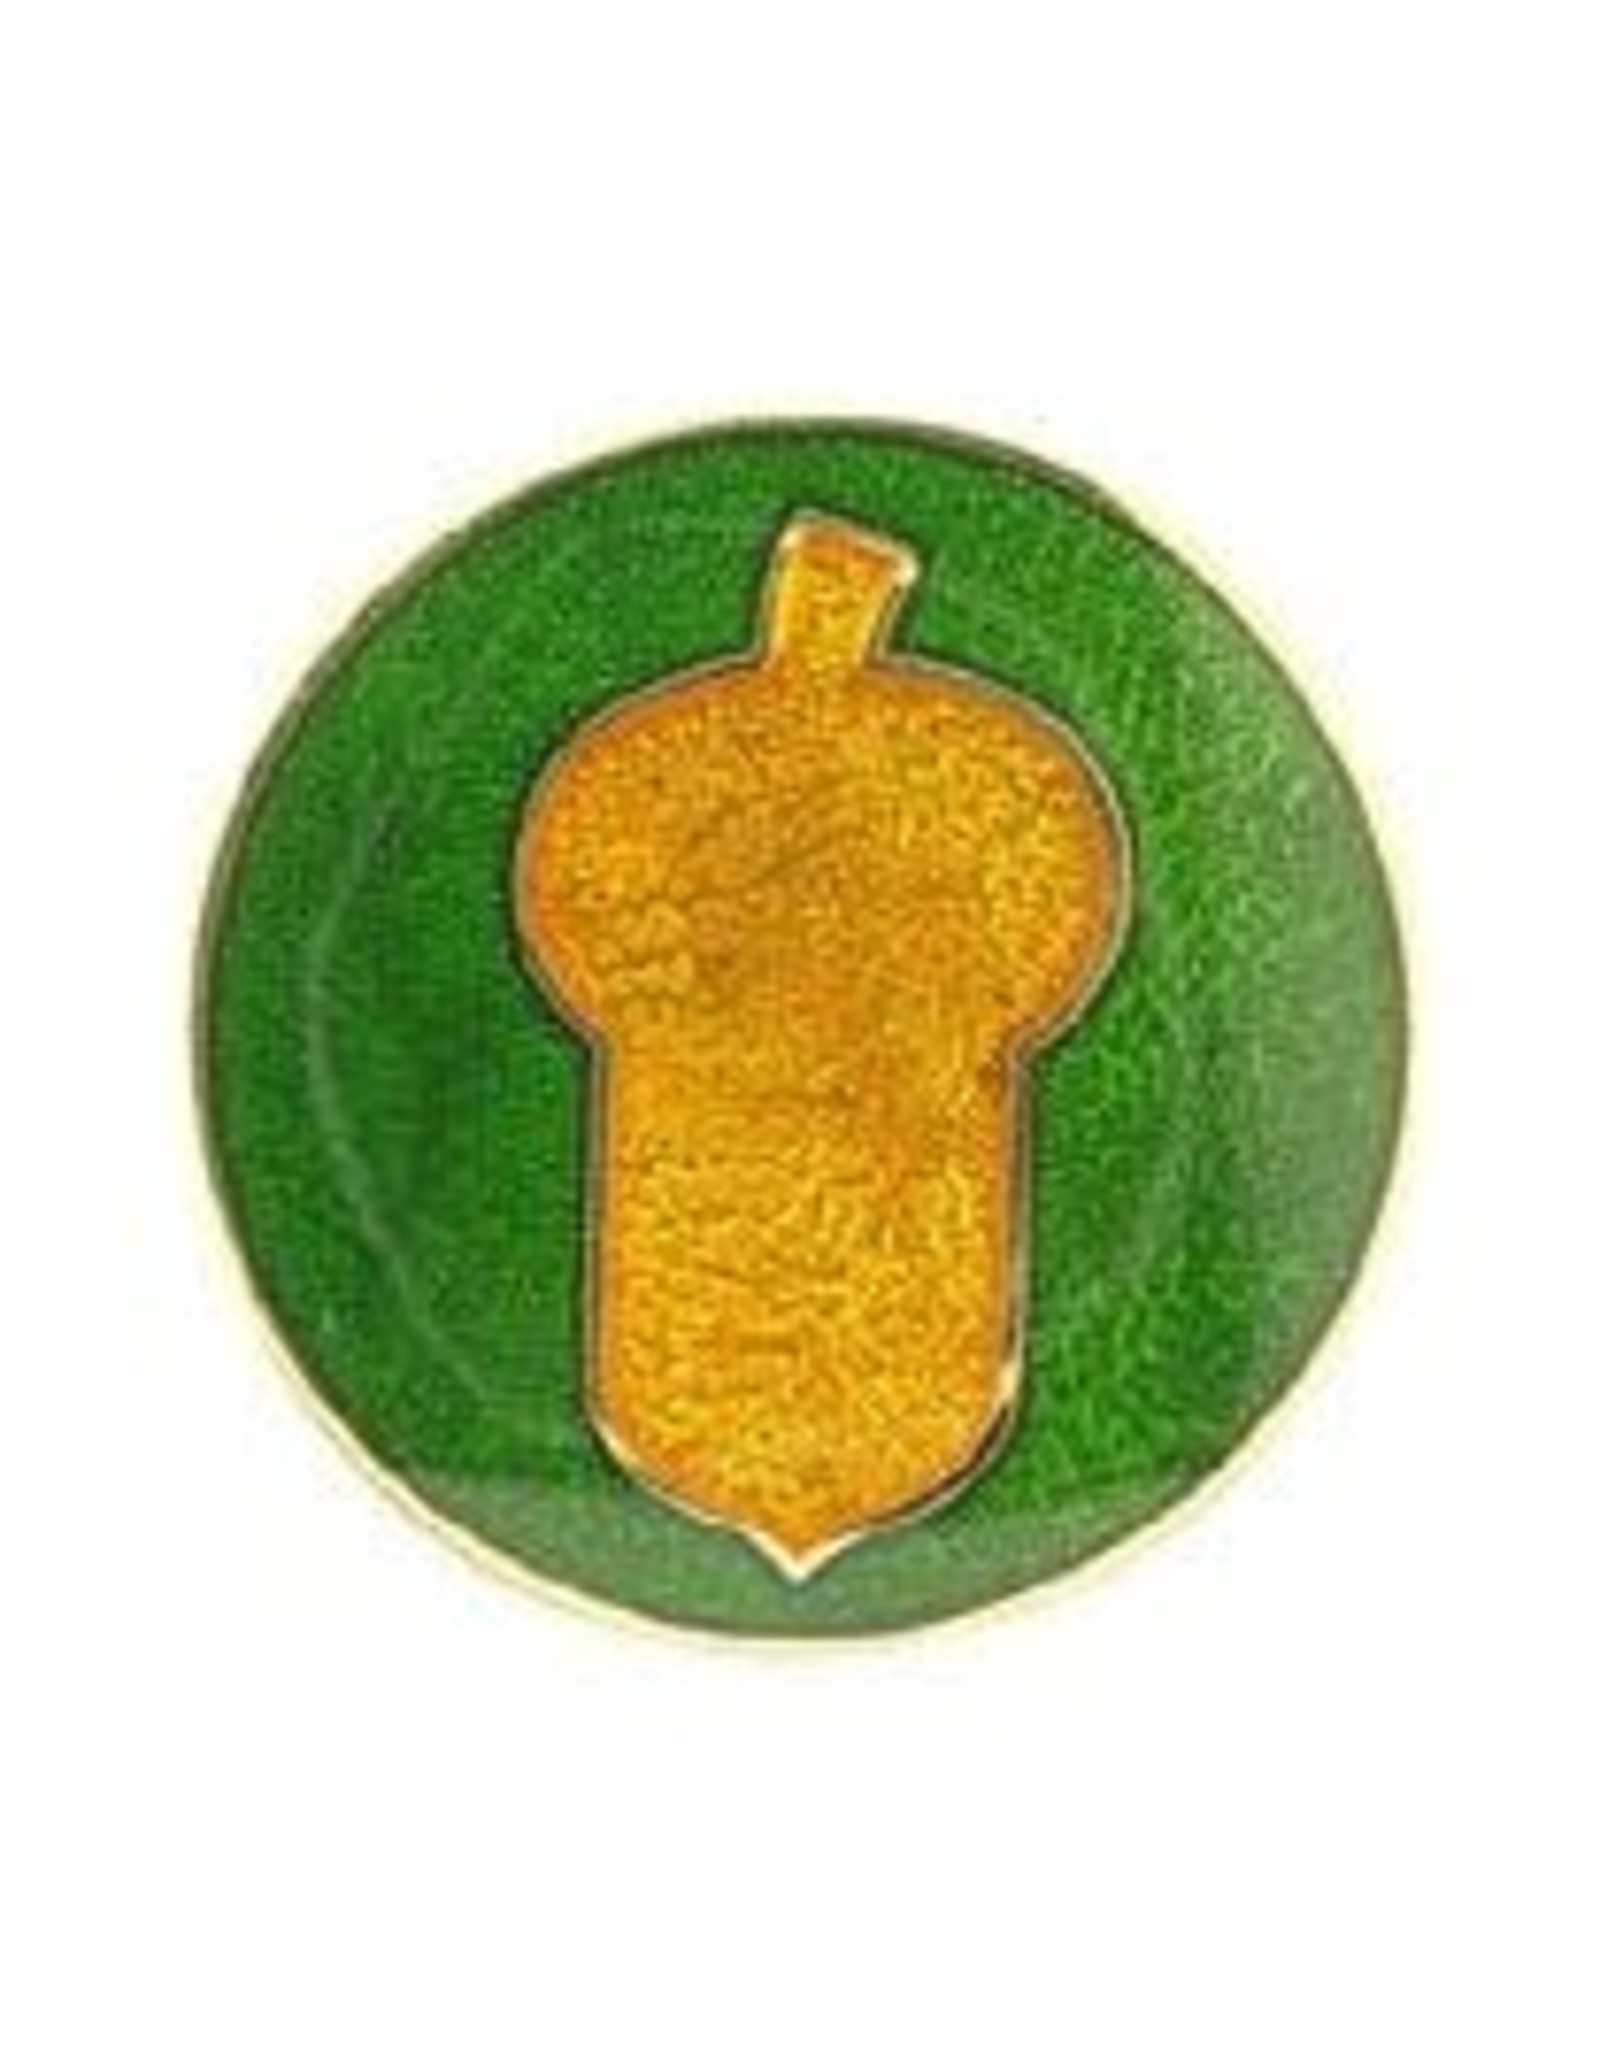 Pin - Army 087th Inf Div